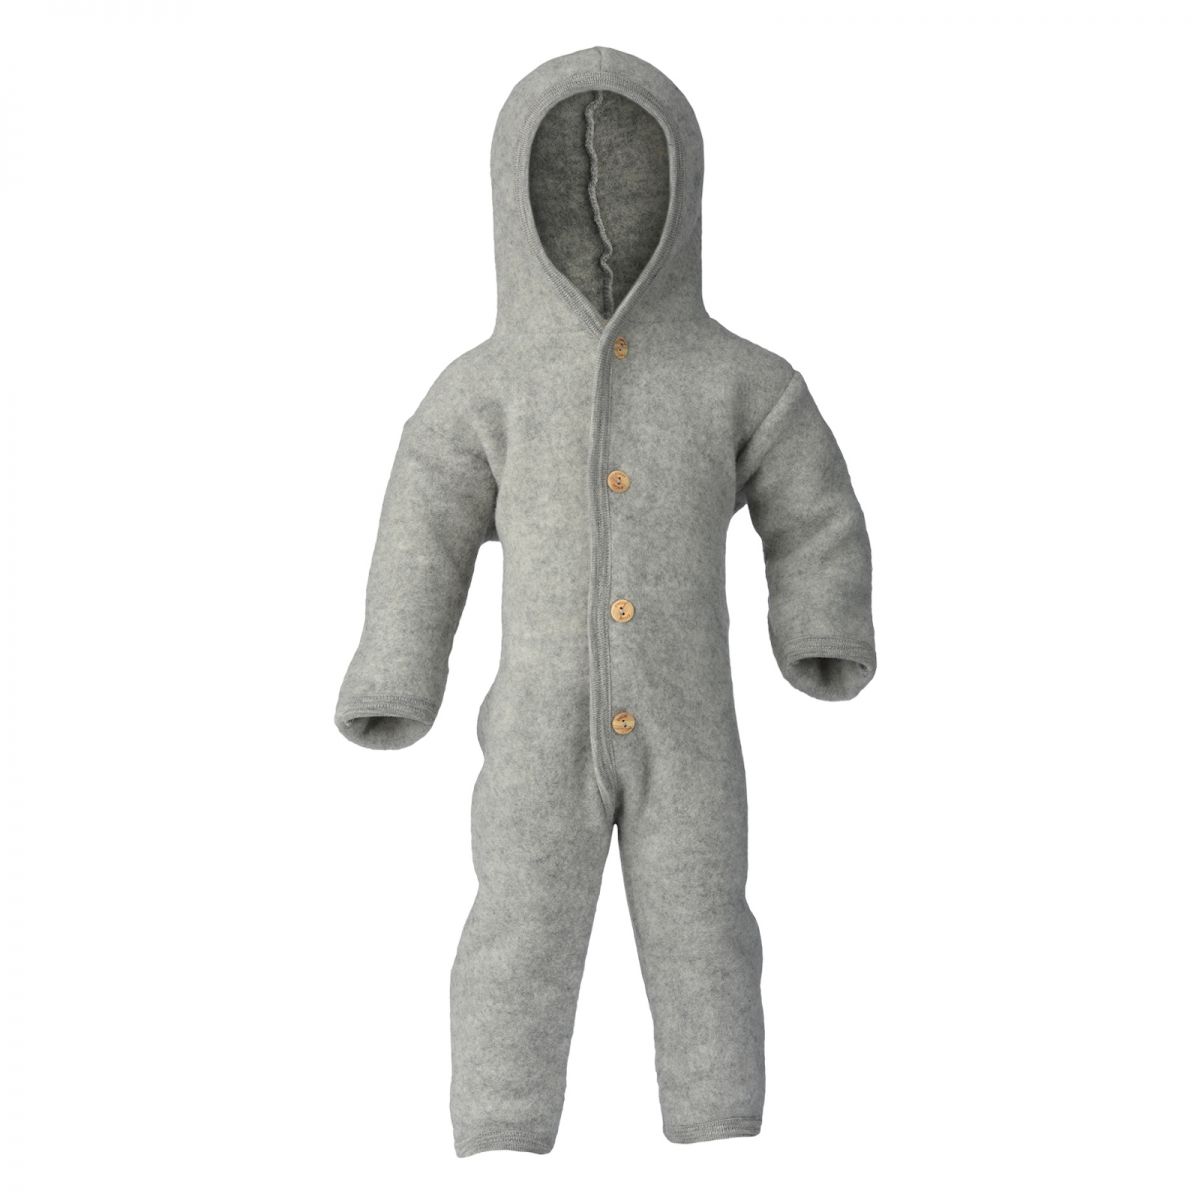 ENGEL Natur Hooded overall with buttons light Grey melange 575722-091 